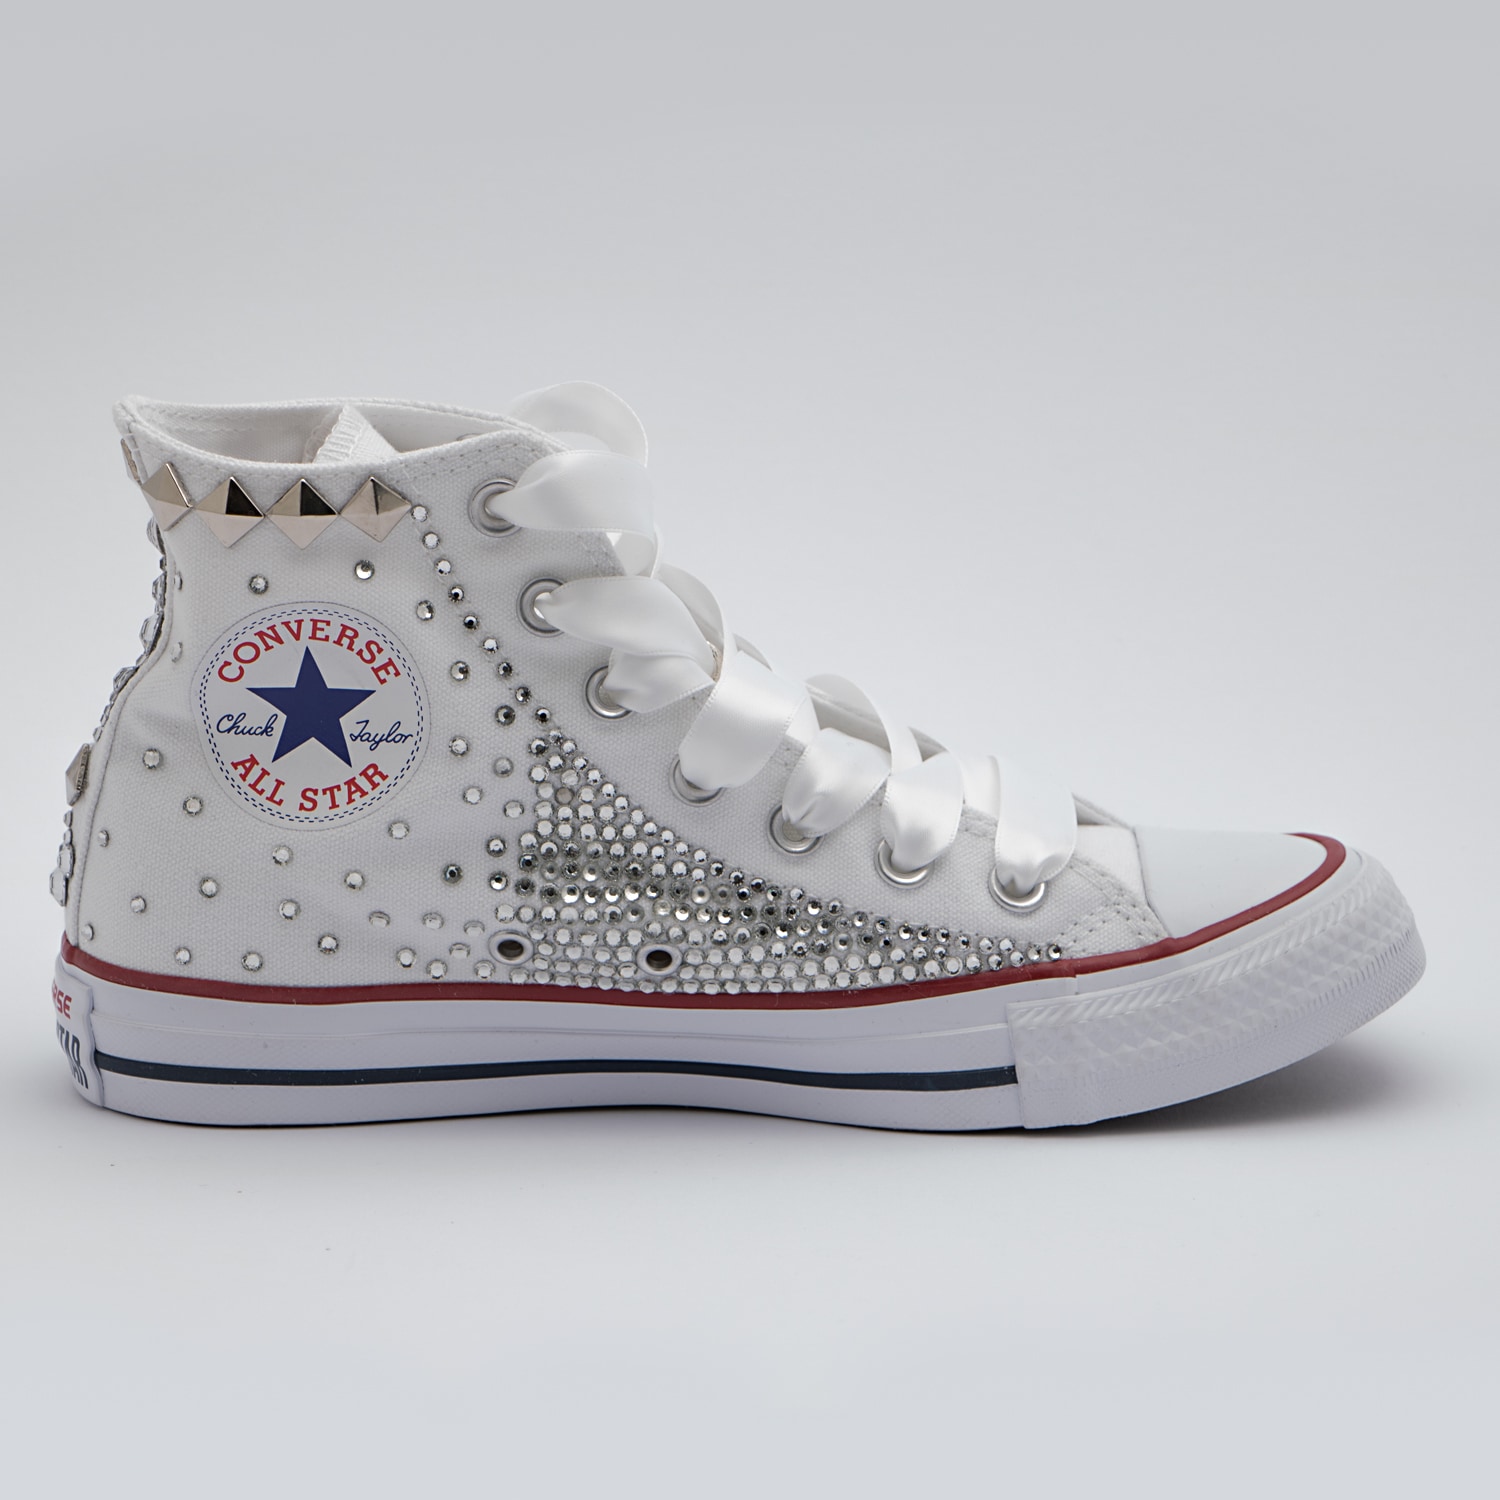 All Star Con Strass Outlet Shop UP TO 63% OFF | www.aramanatural.es فيتامين د النهدي